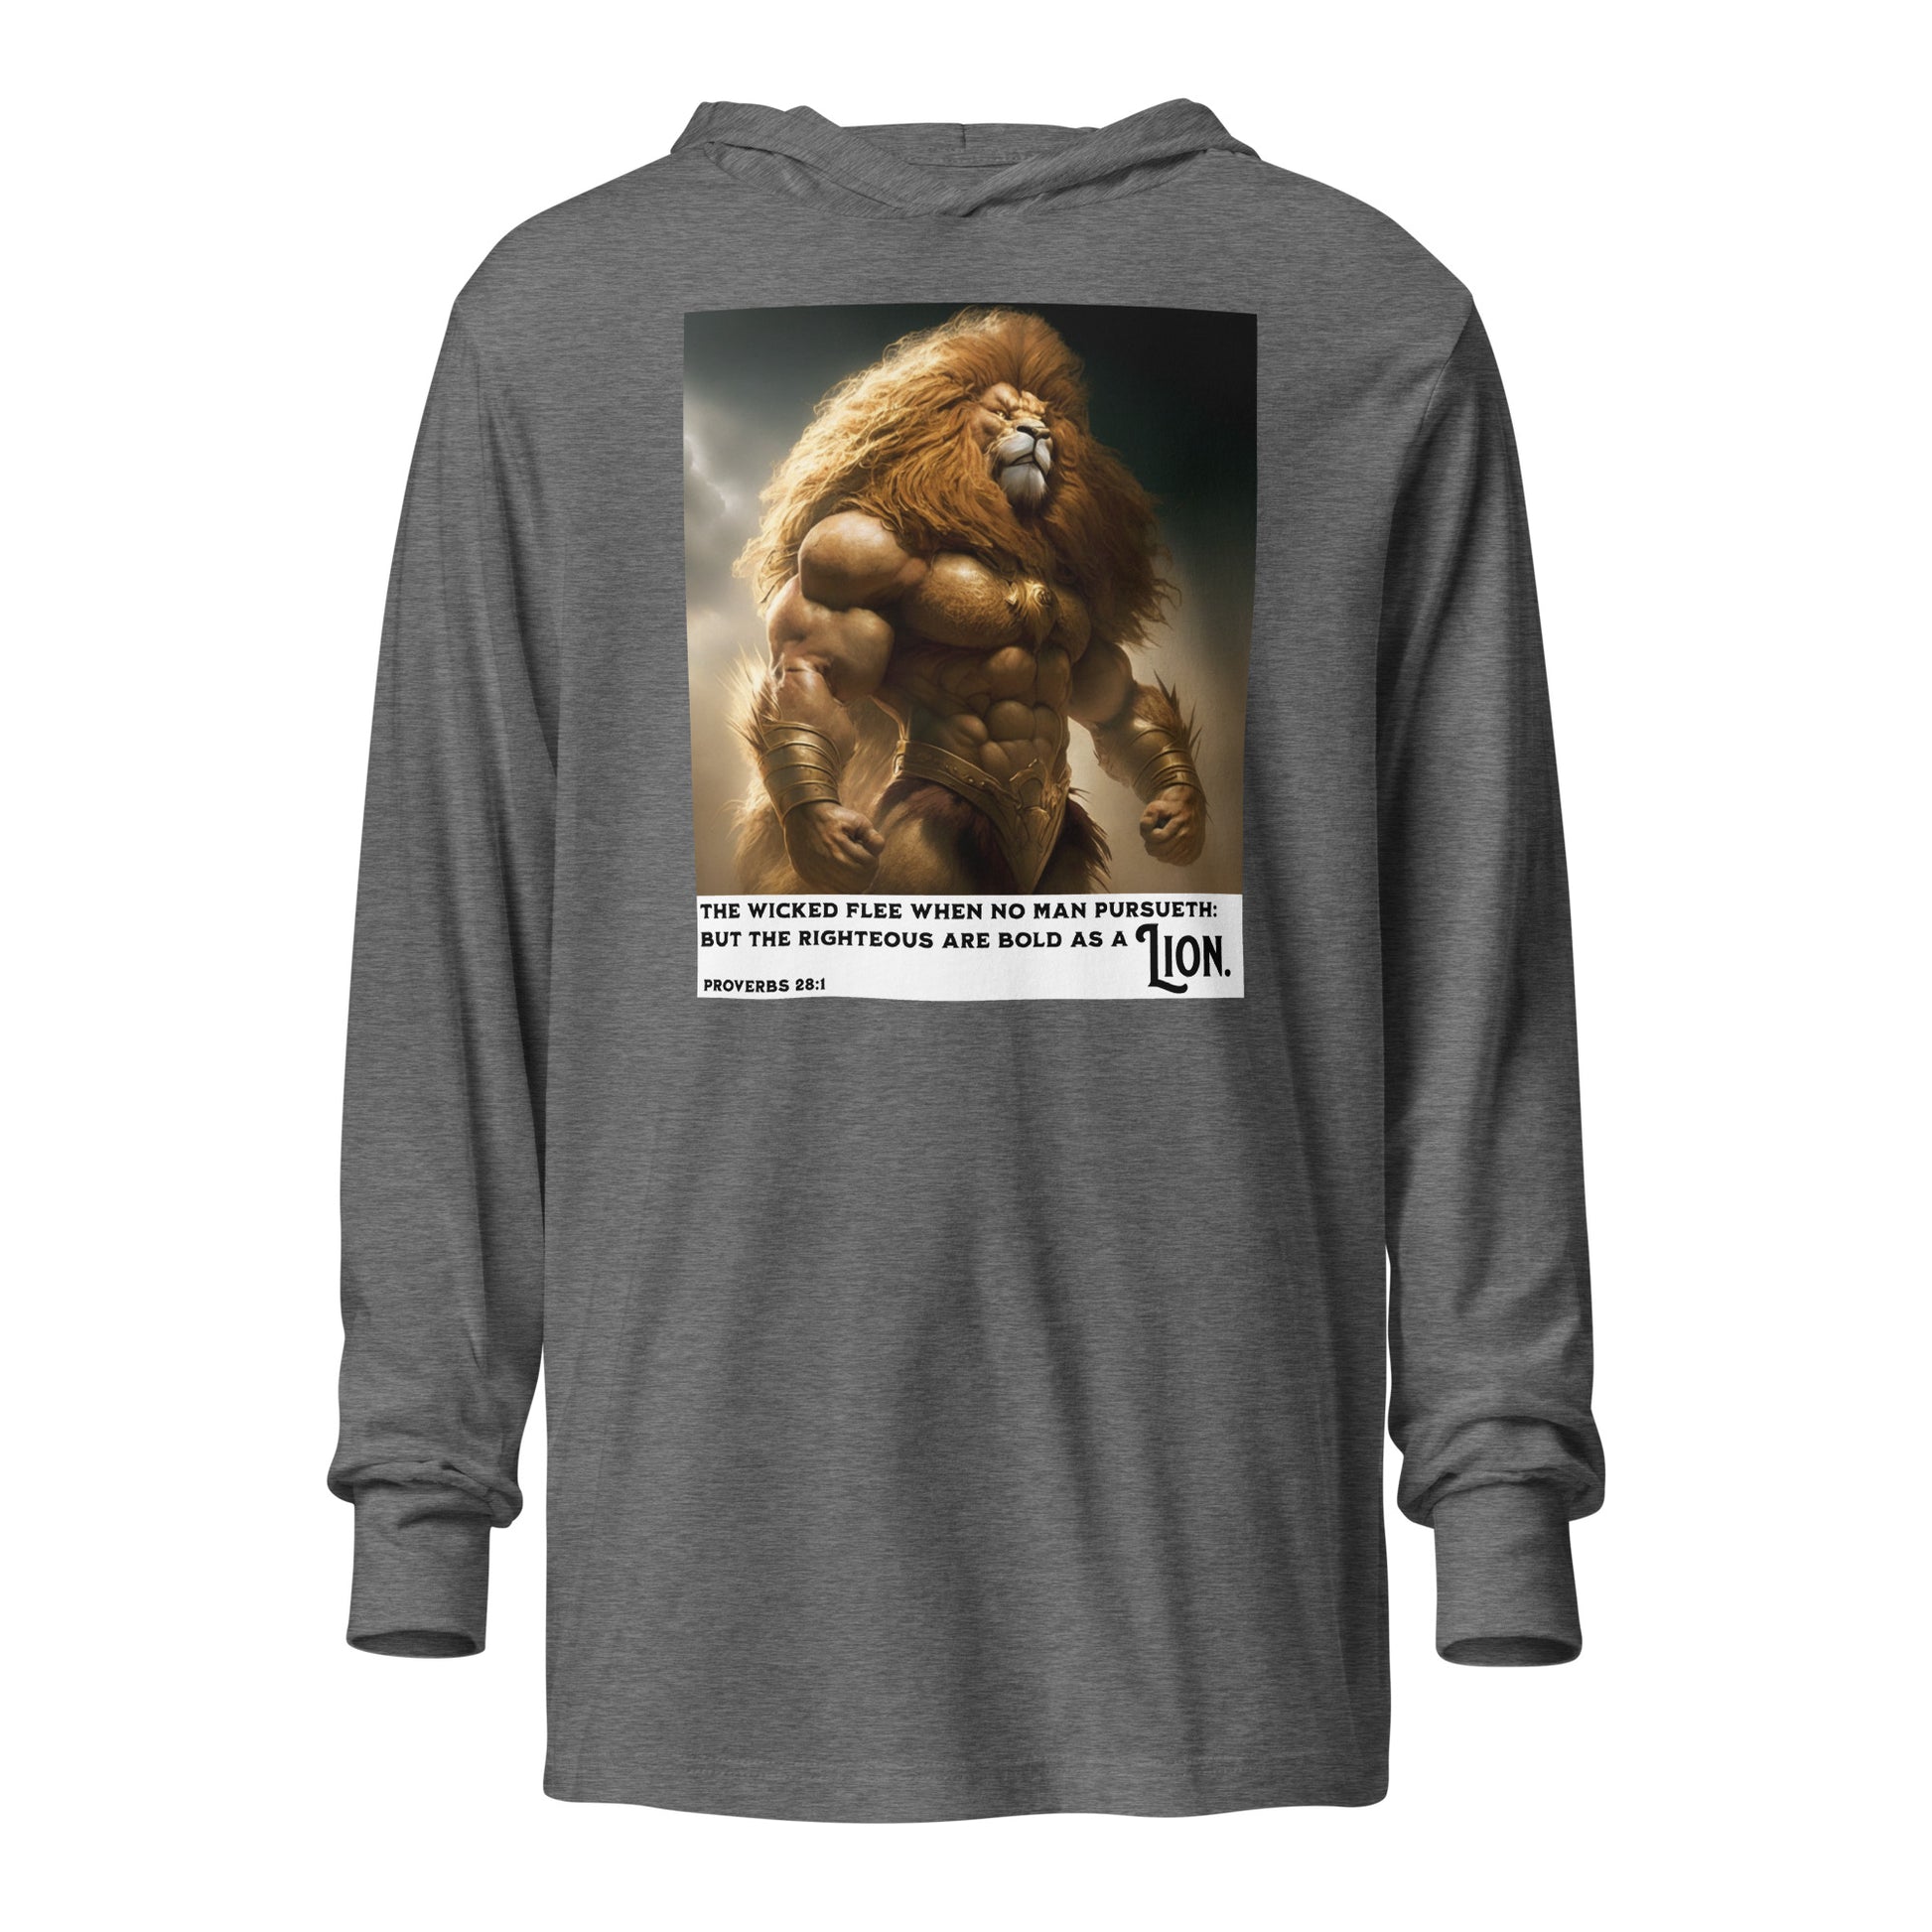 Swole Bold Lion Christian Men's Hooded Long-Sleeve Graphic Tee Grey Triblend